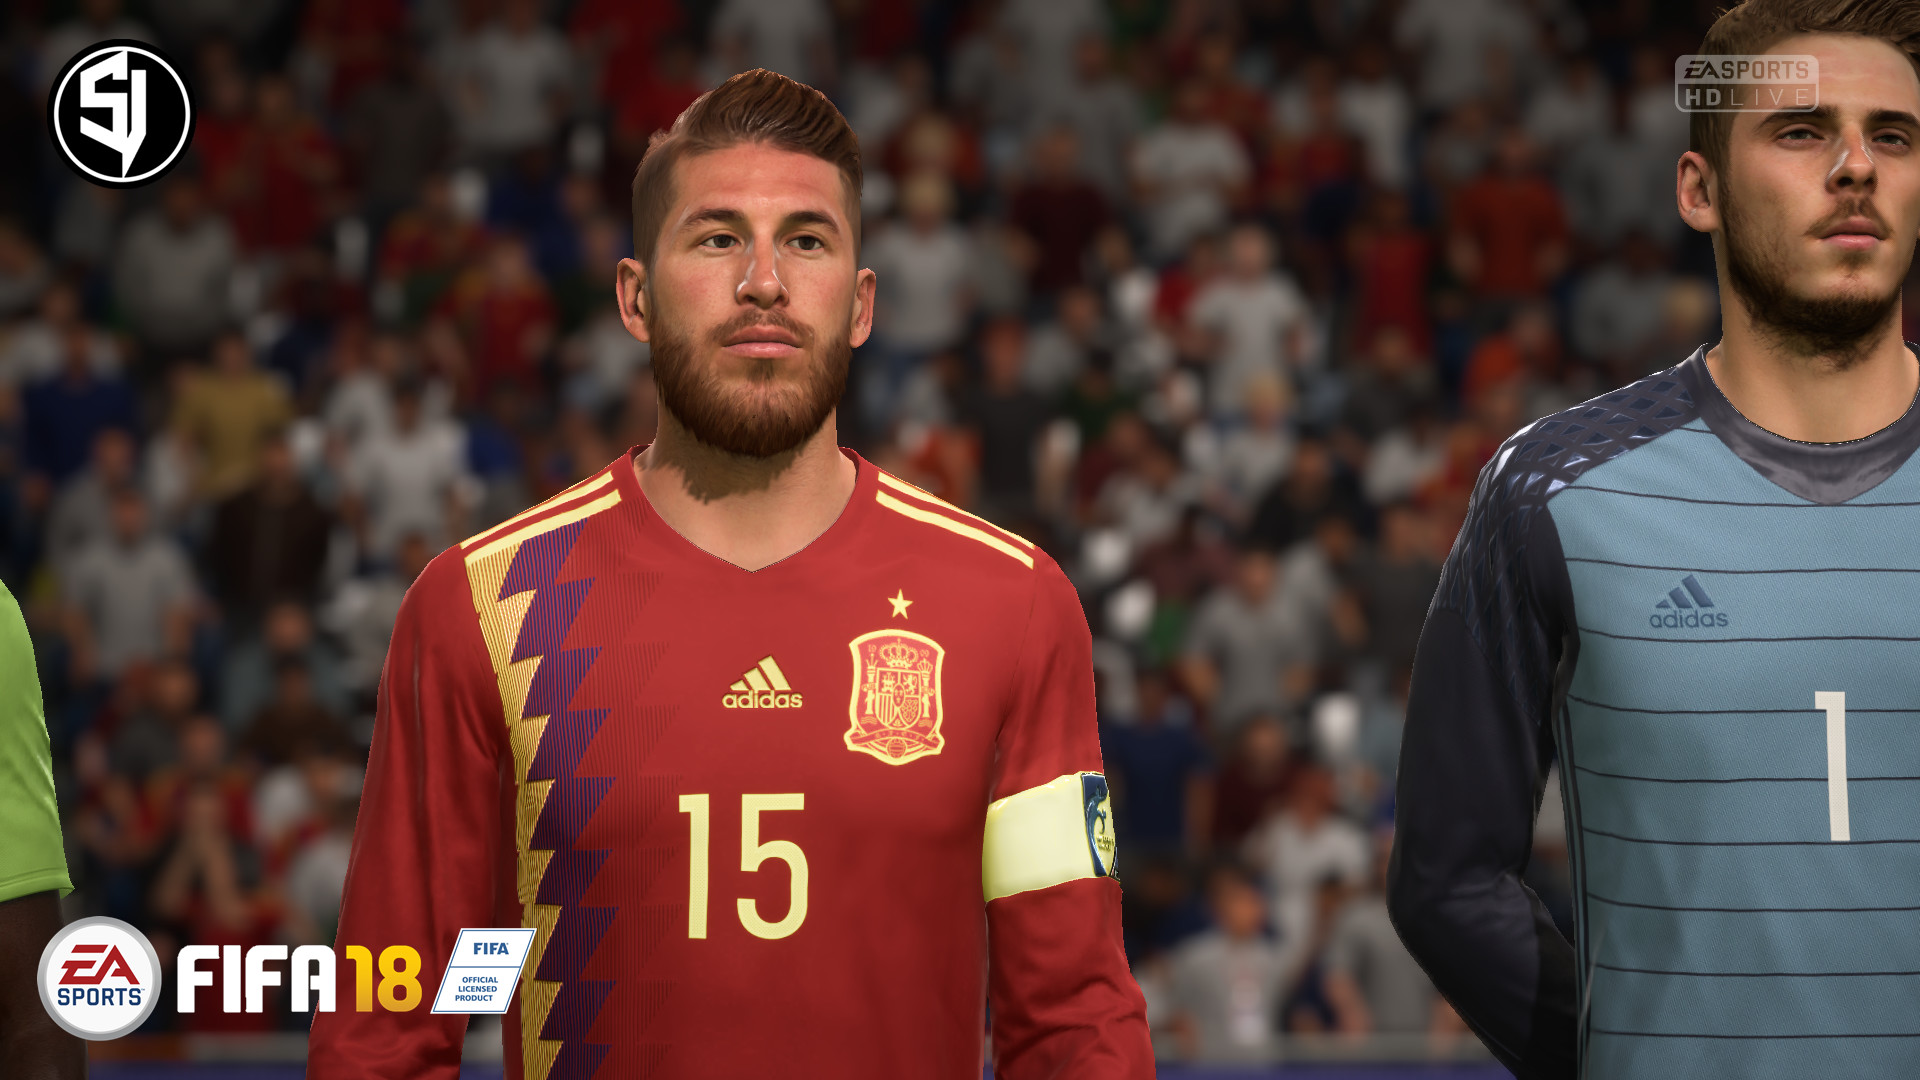 1920x1080 You can follow my progress in mods for FIFA 18 on my FB:  https://www.facebook.com/shuajota/ and my twitter:  https://twitter.com/shuajota